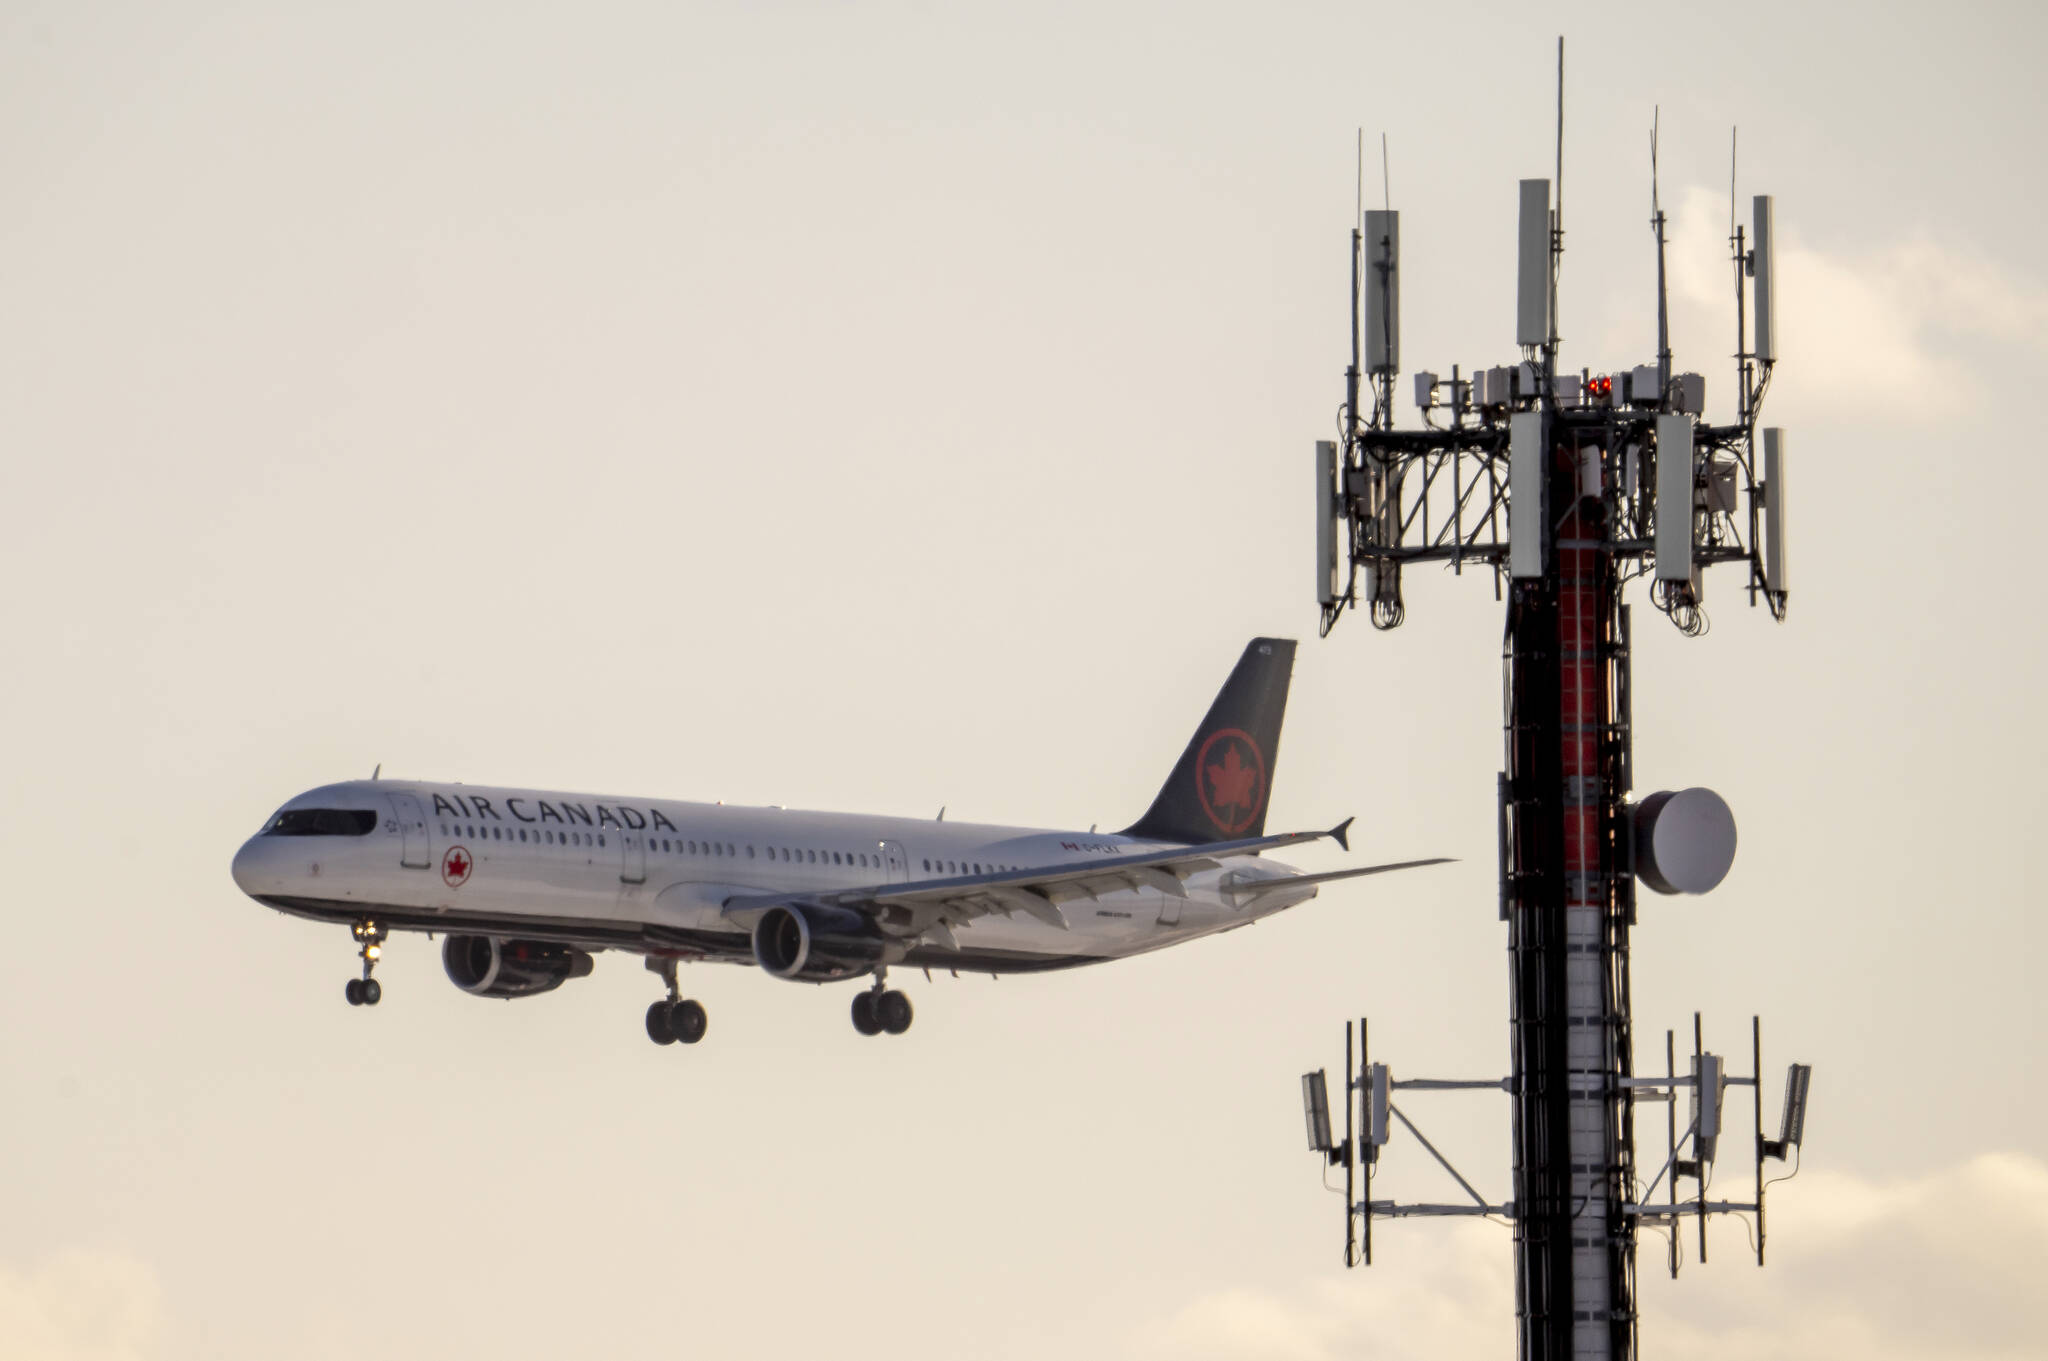 An Air Canada jet flies past a cell phone tower as it comes in to land at Pearson Airport in Toronto on Thursday January 20, 2022. THE CANADIAN PRESS/Frank Gunn